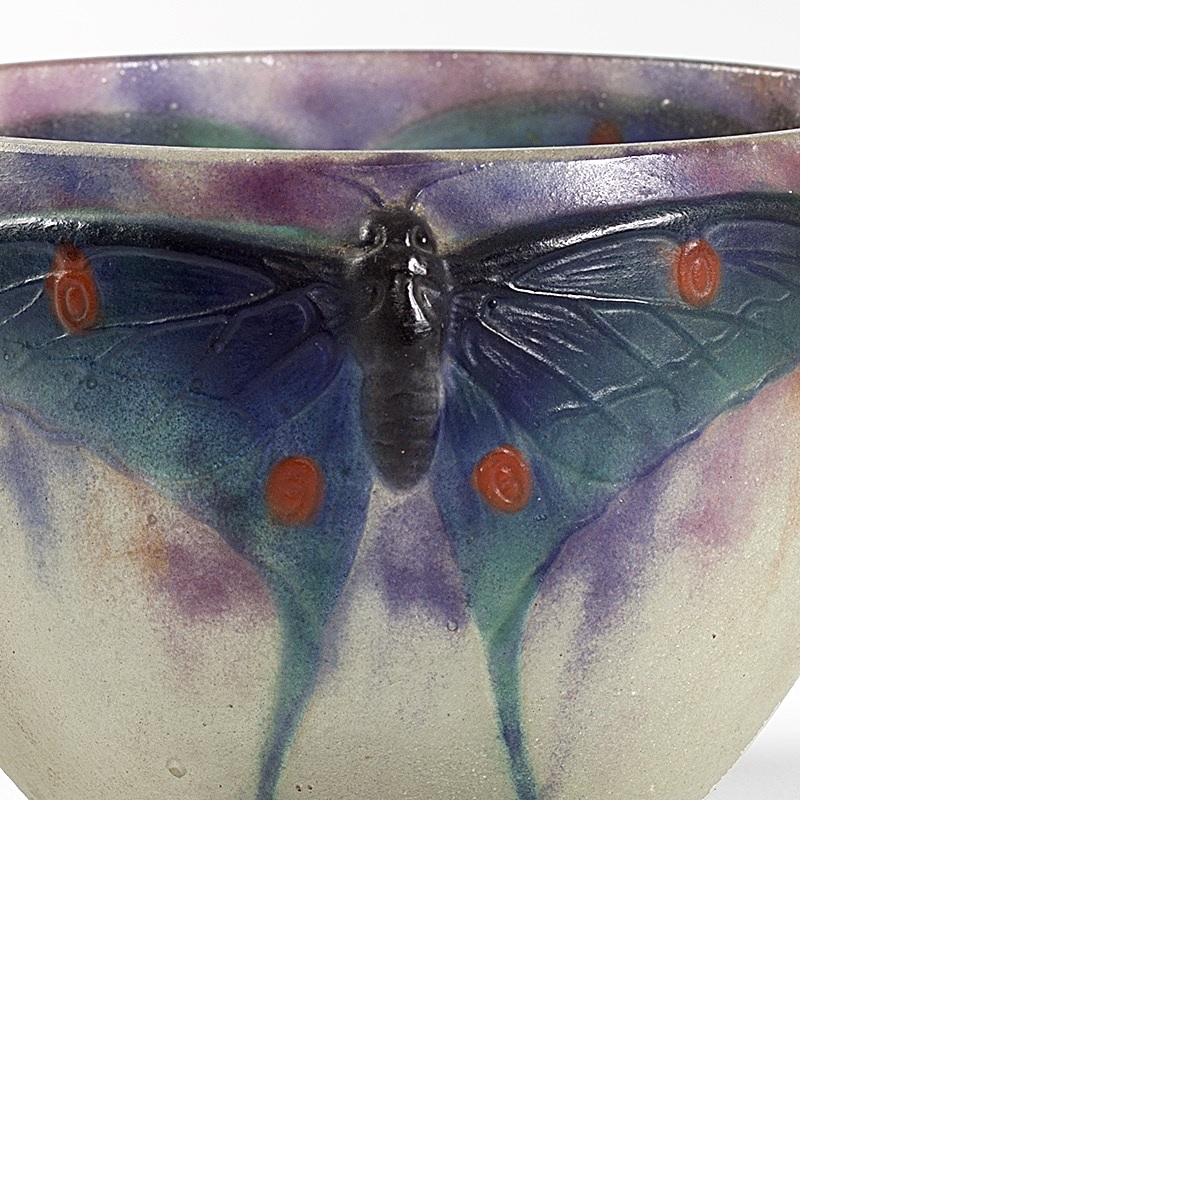 A French Art Nouveau pâte de verre “Papillon” bowl by Gabriel Argy-Rousseau. The bowl has three Luna moths with brown bodies and textured green wings with red spots. They sit just below the bowl’s rim in a background of mottled purple and pink,